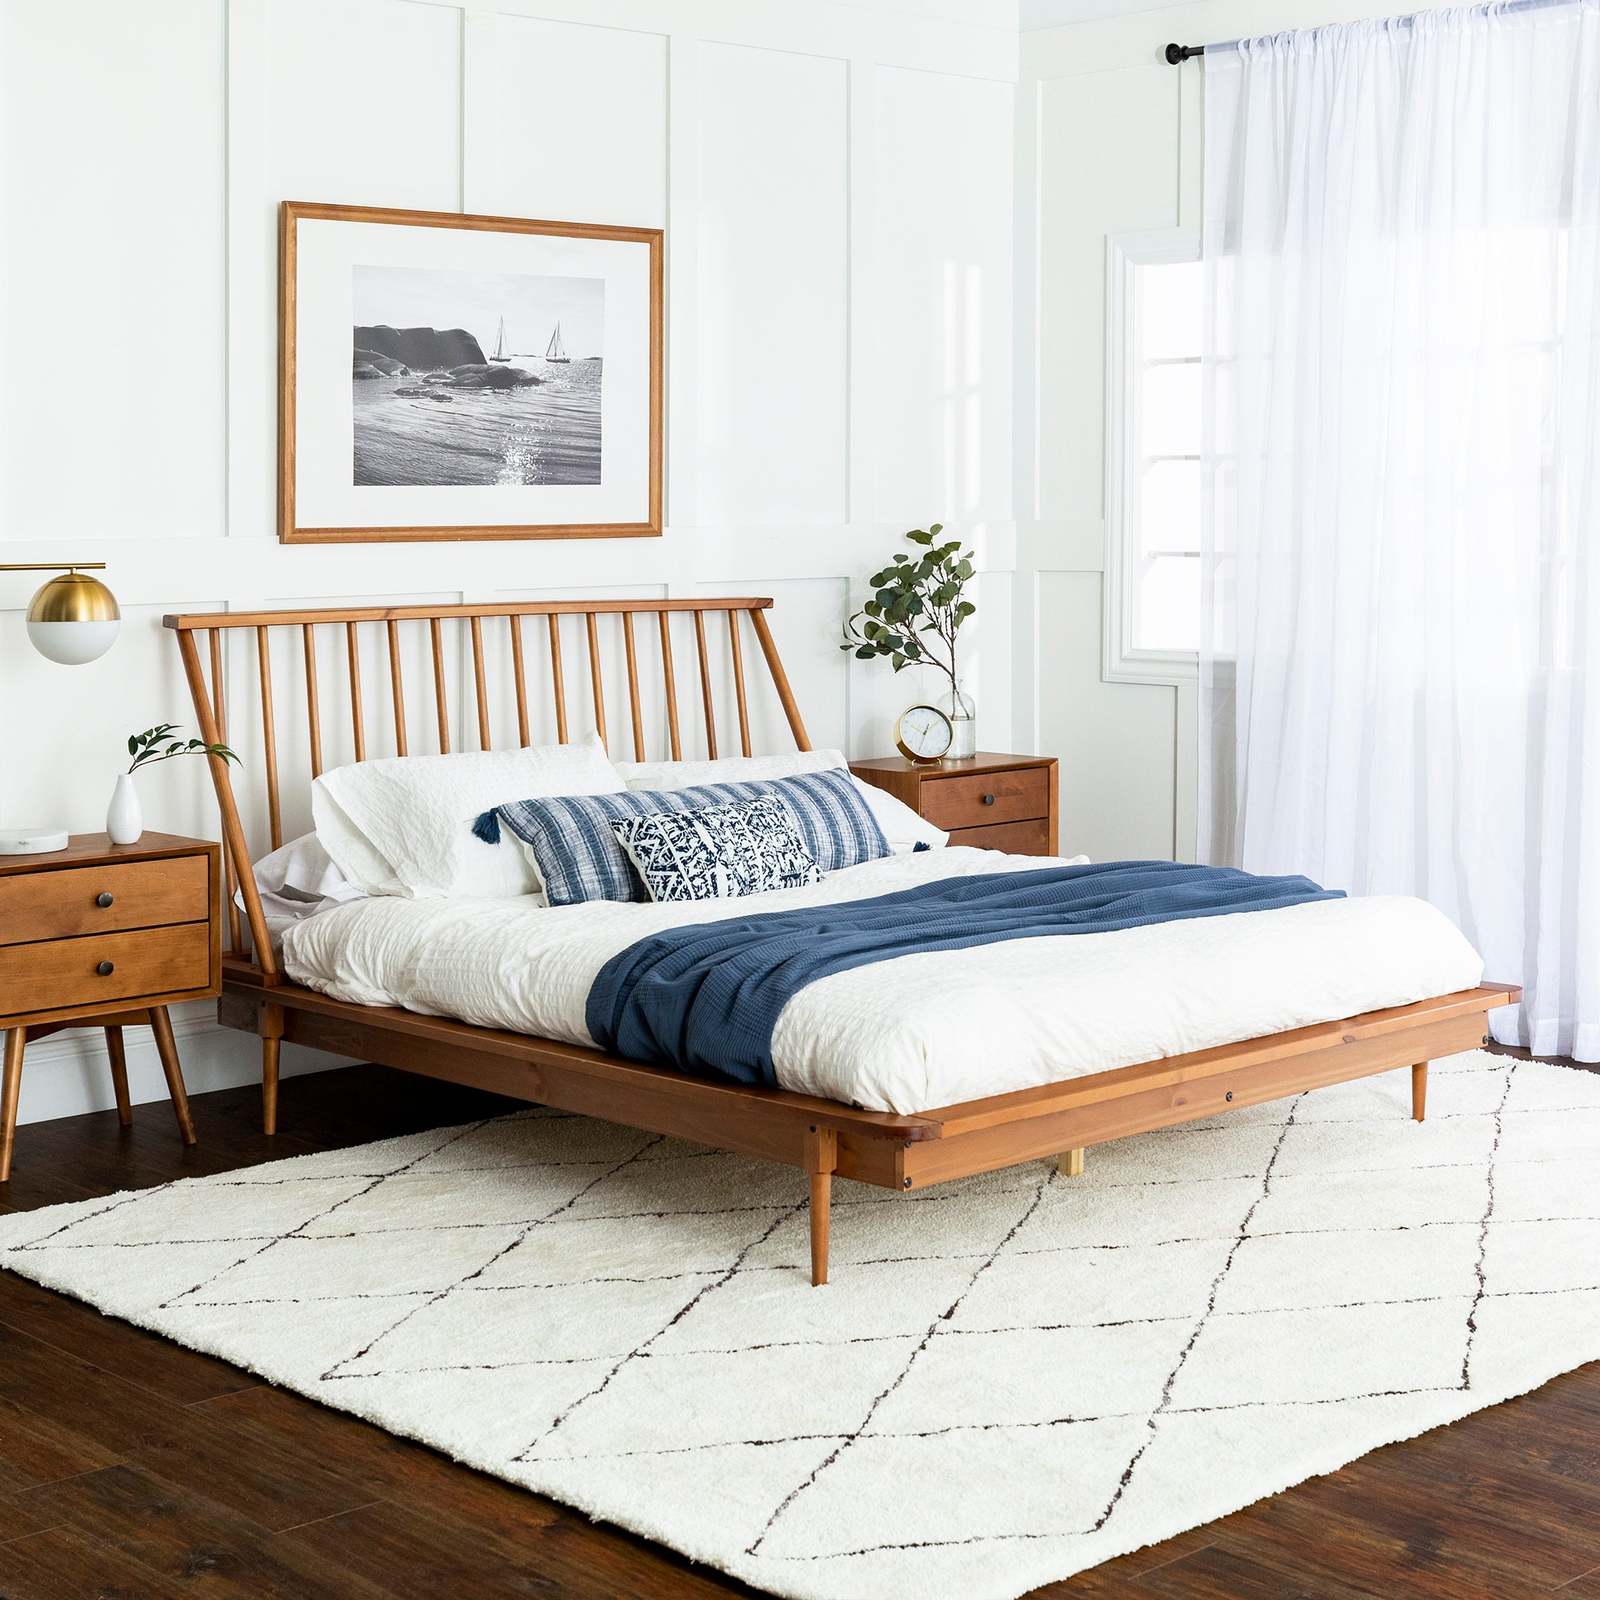 Sleep Better with this Platform Bed